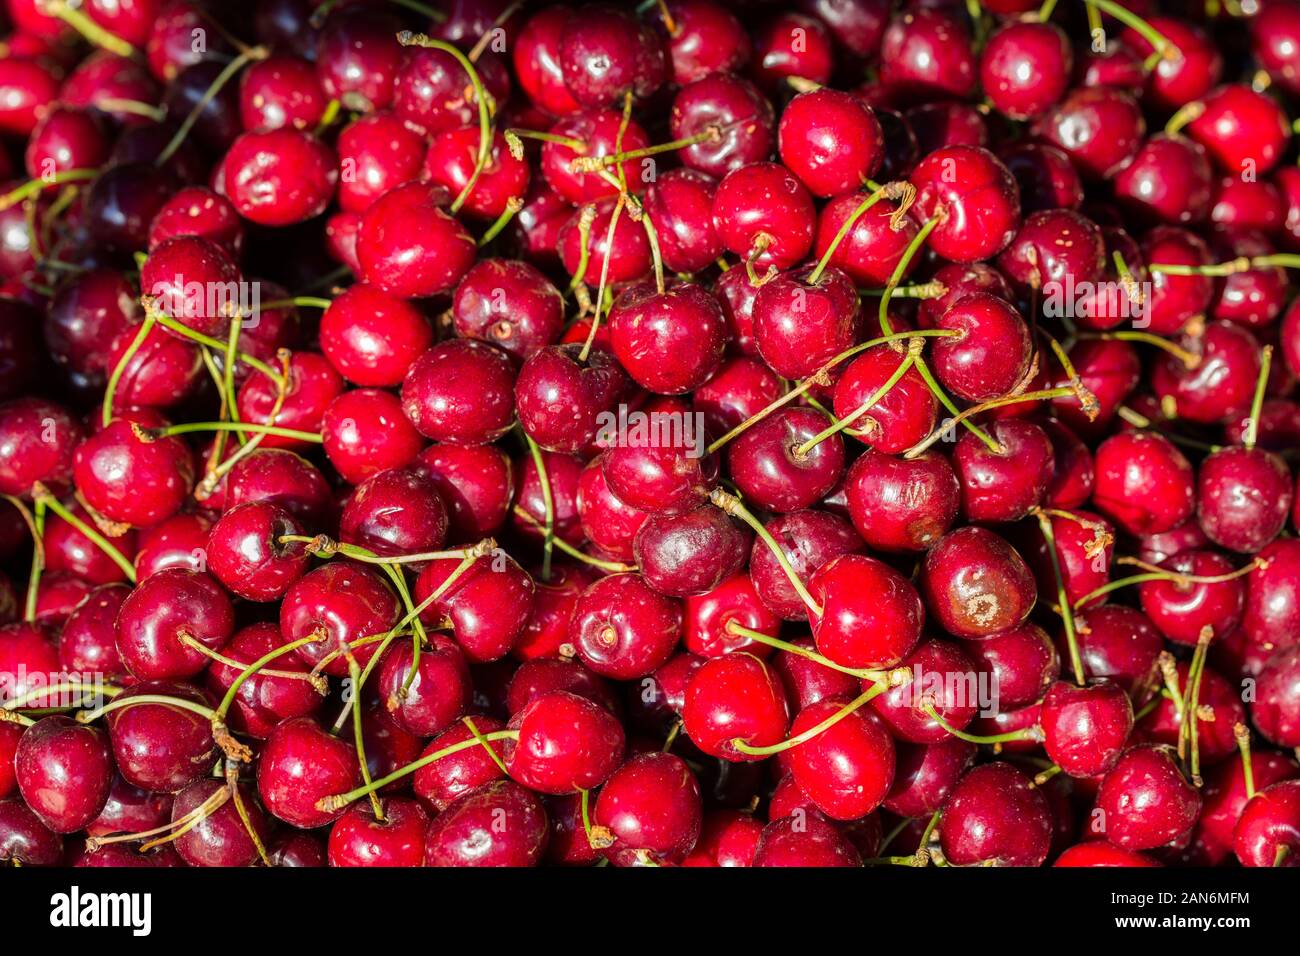 View on fresh, red cherries. Cherries are a fleshy drupe (stone fruit) and belong to the genus of prunus (trees & shrubs with fruits like cherries). Stock Photo